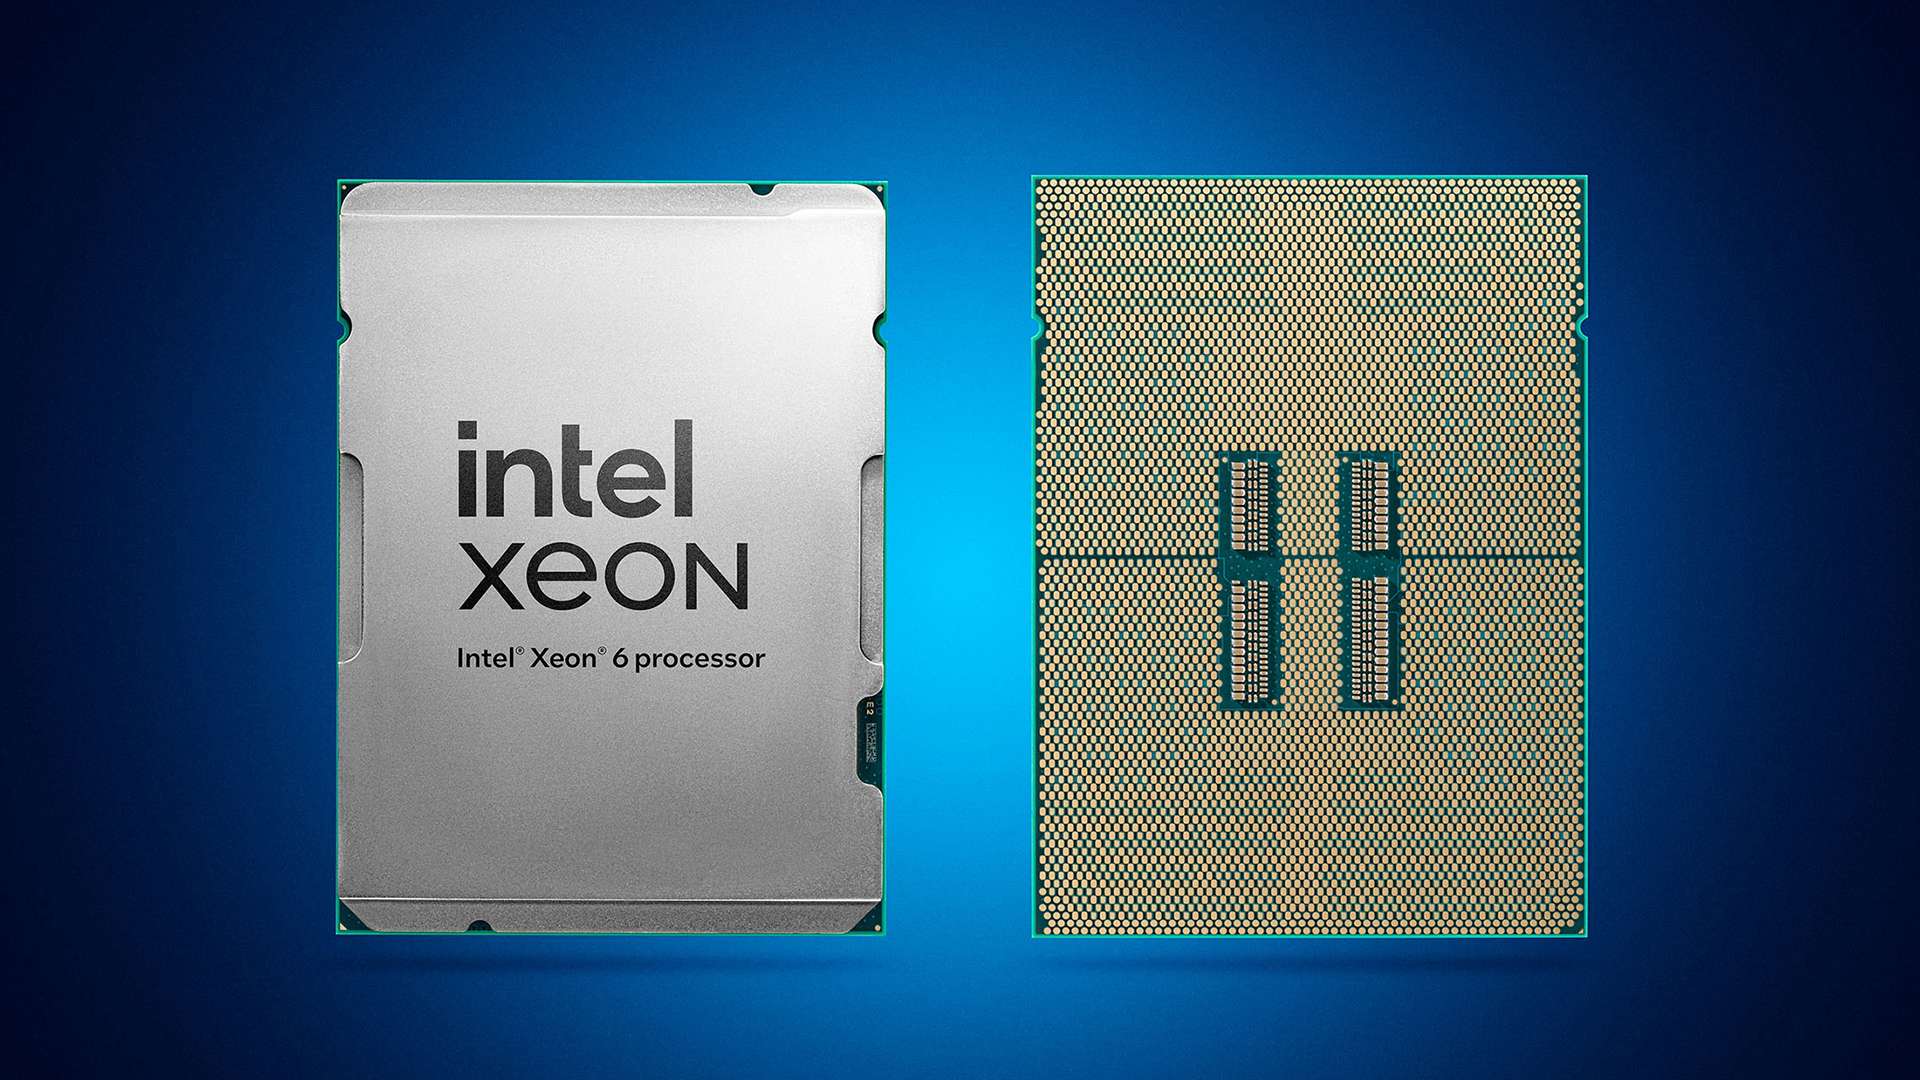 At Computex in Taipei, Taiwan, on June 4, 2024, Intel launched the Intel Xeon 6 processors with Efficient-cores (E-cores). For companies looking to refresh aging infrastructure to help reduce costs and free up space, Intel Xeon 6 with E-cores offers significant rack density advantages, enabling a 3-to-1 rack-level consolidation. (Credit: Intel Corporation)